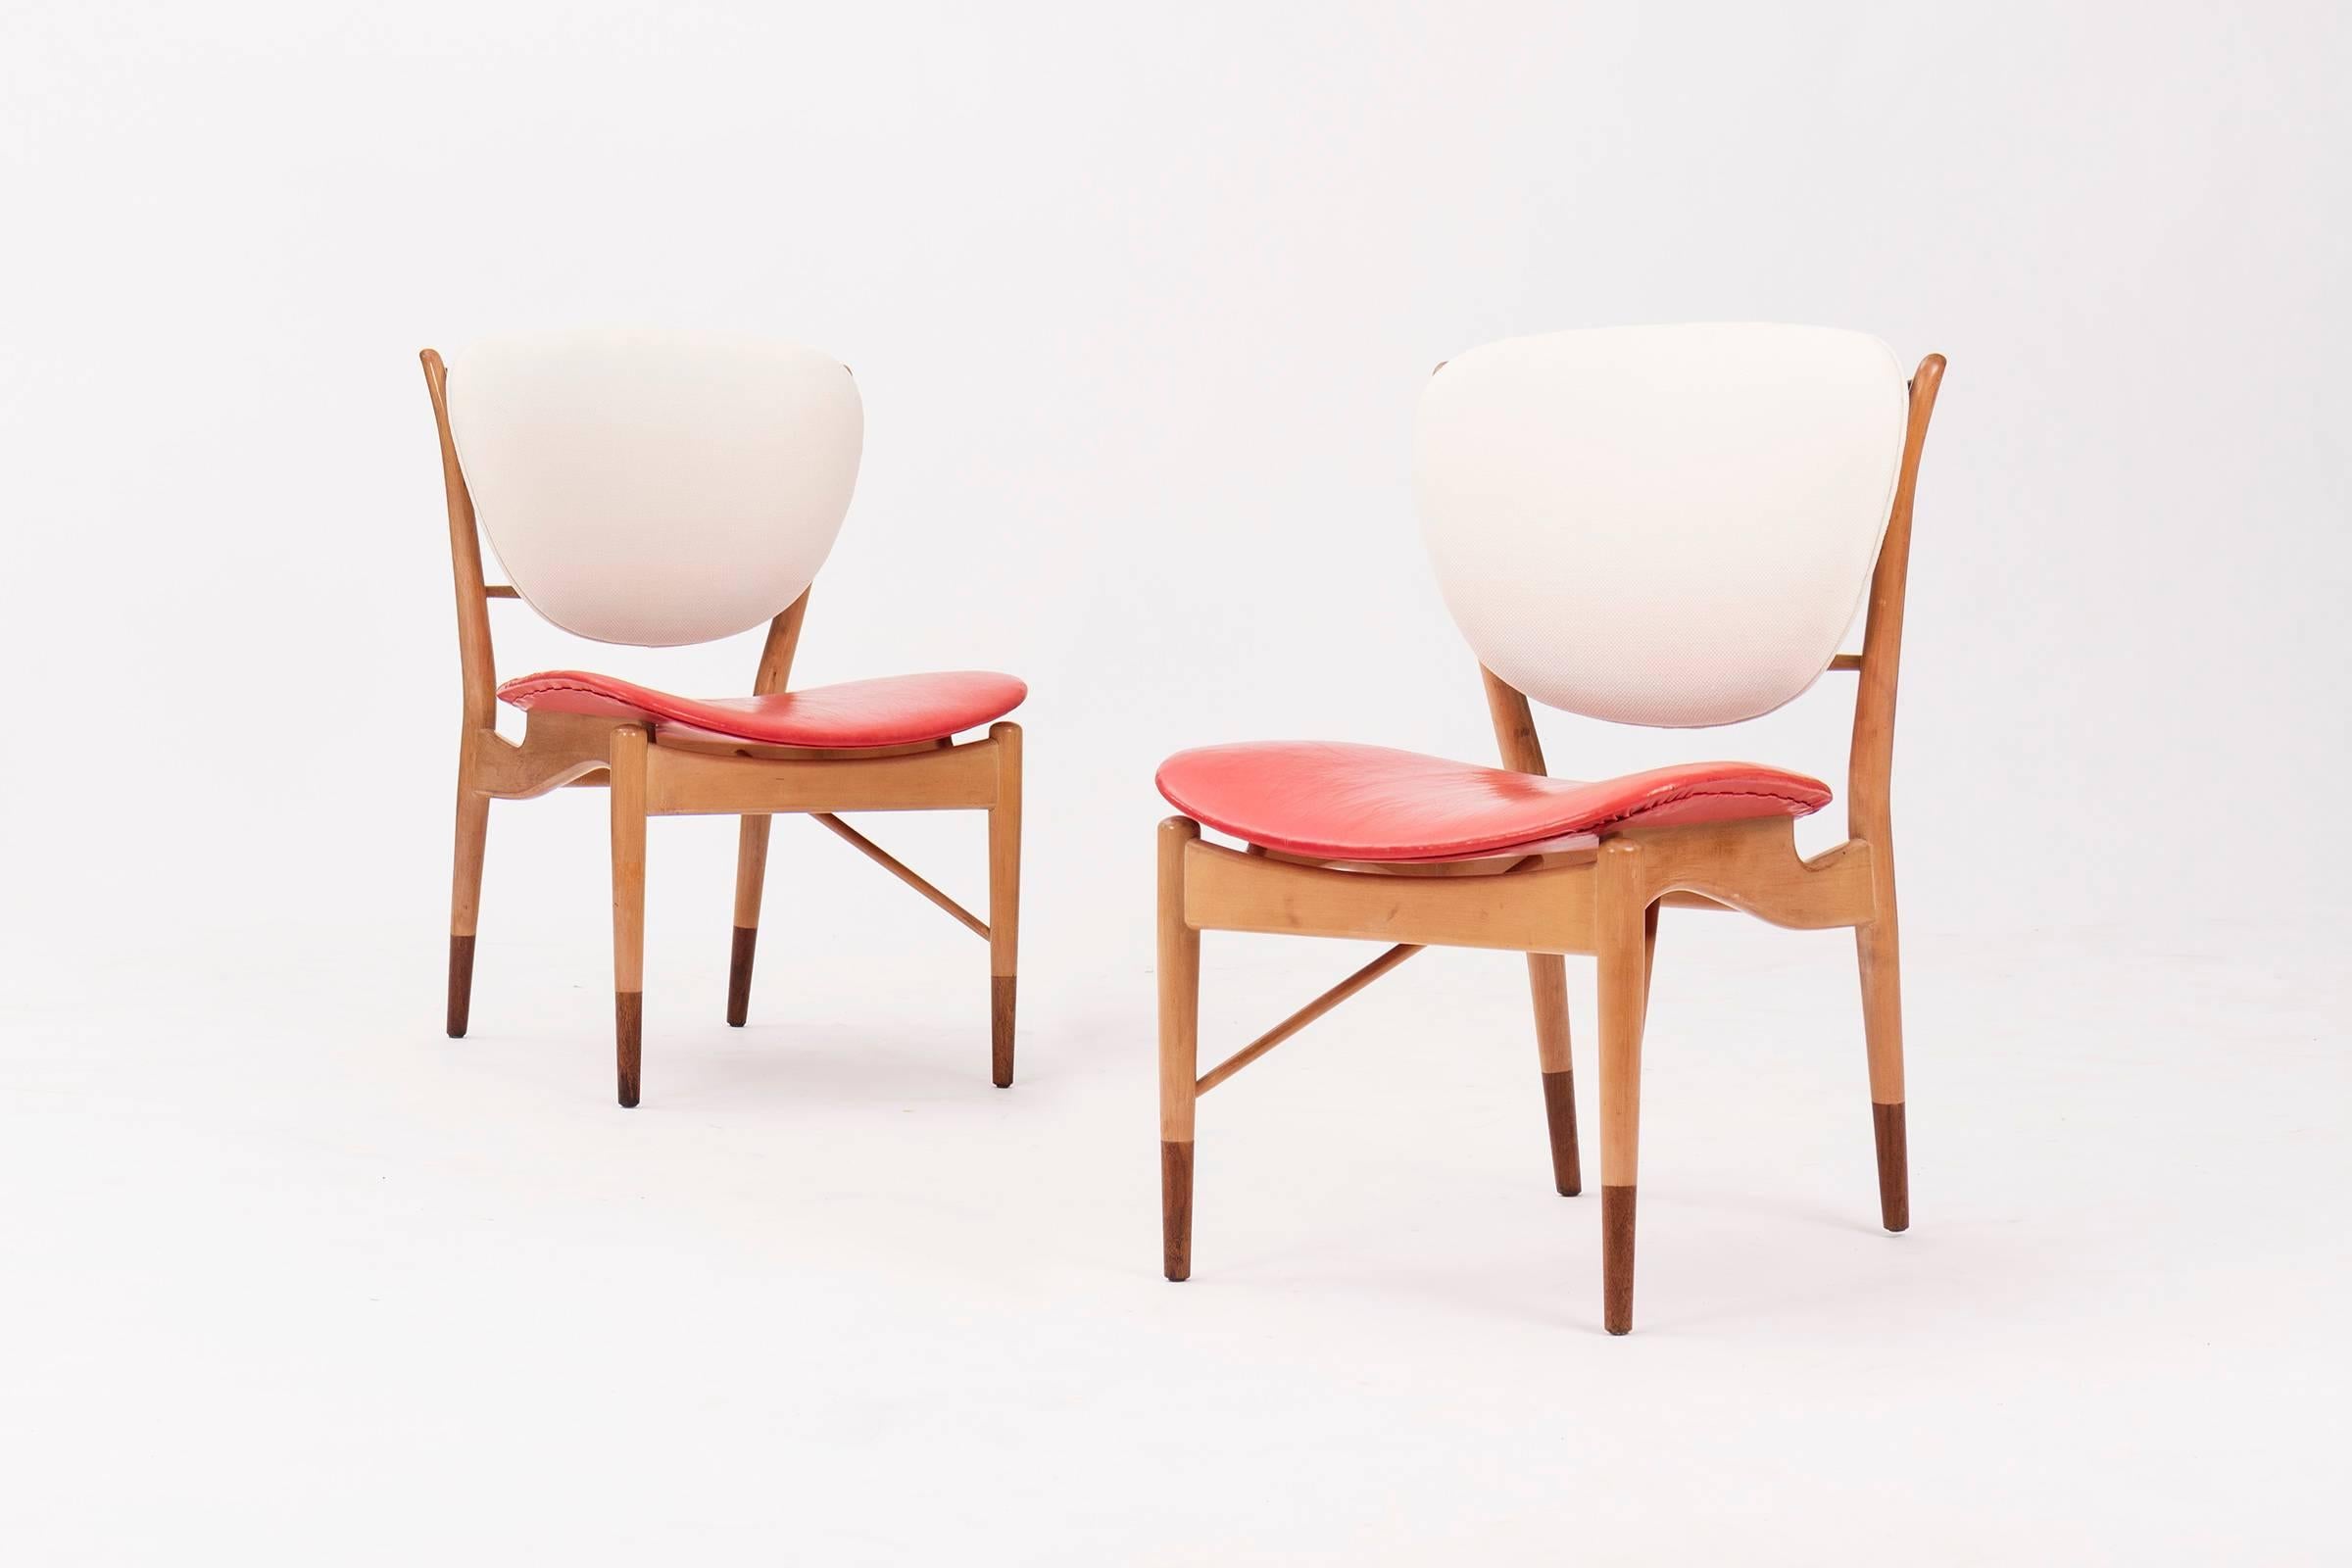 Finn Juhl for Baker Furniture Company. A pair of model NV 51 side chairs with solid walnut frame with original red leather seat and newly upholstered back.
Seat showing great patina and crazing.